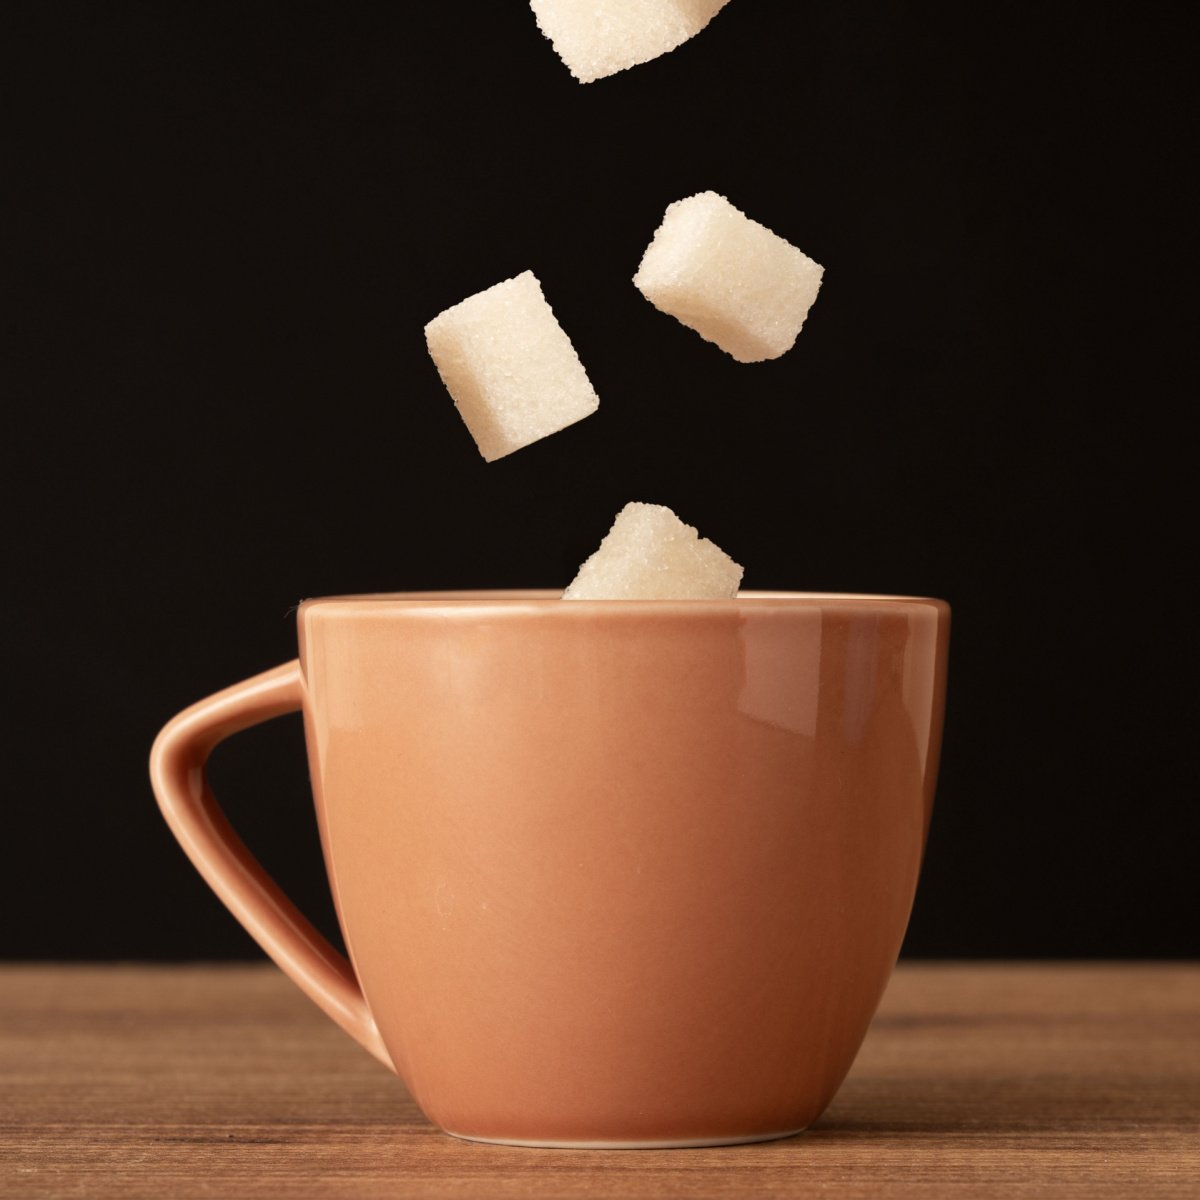 sugar cubes falling=into coffee in ceramic mug on wooden table